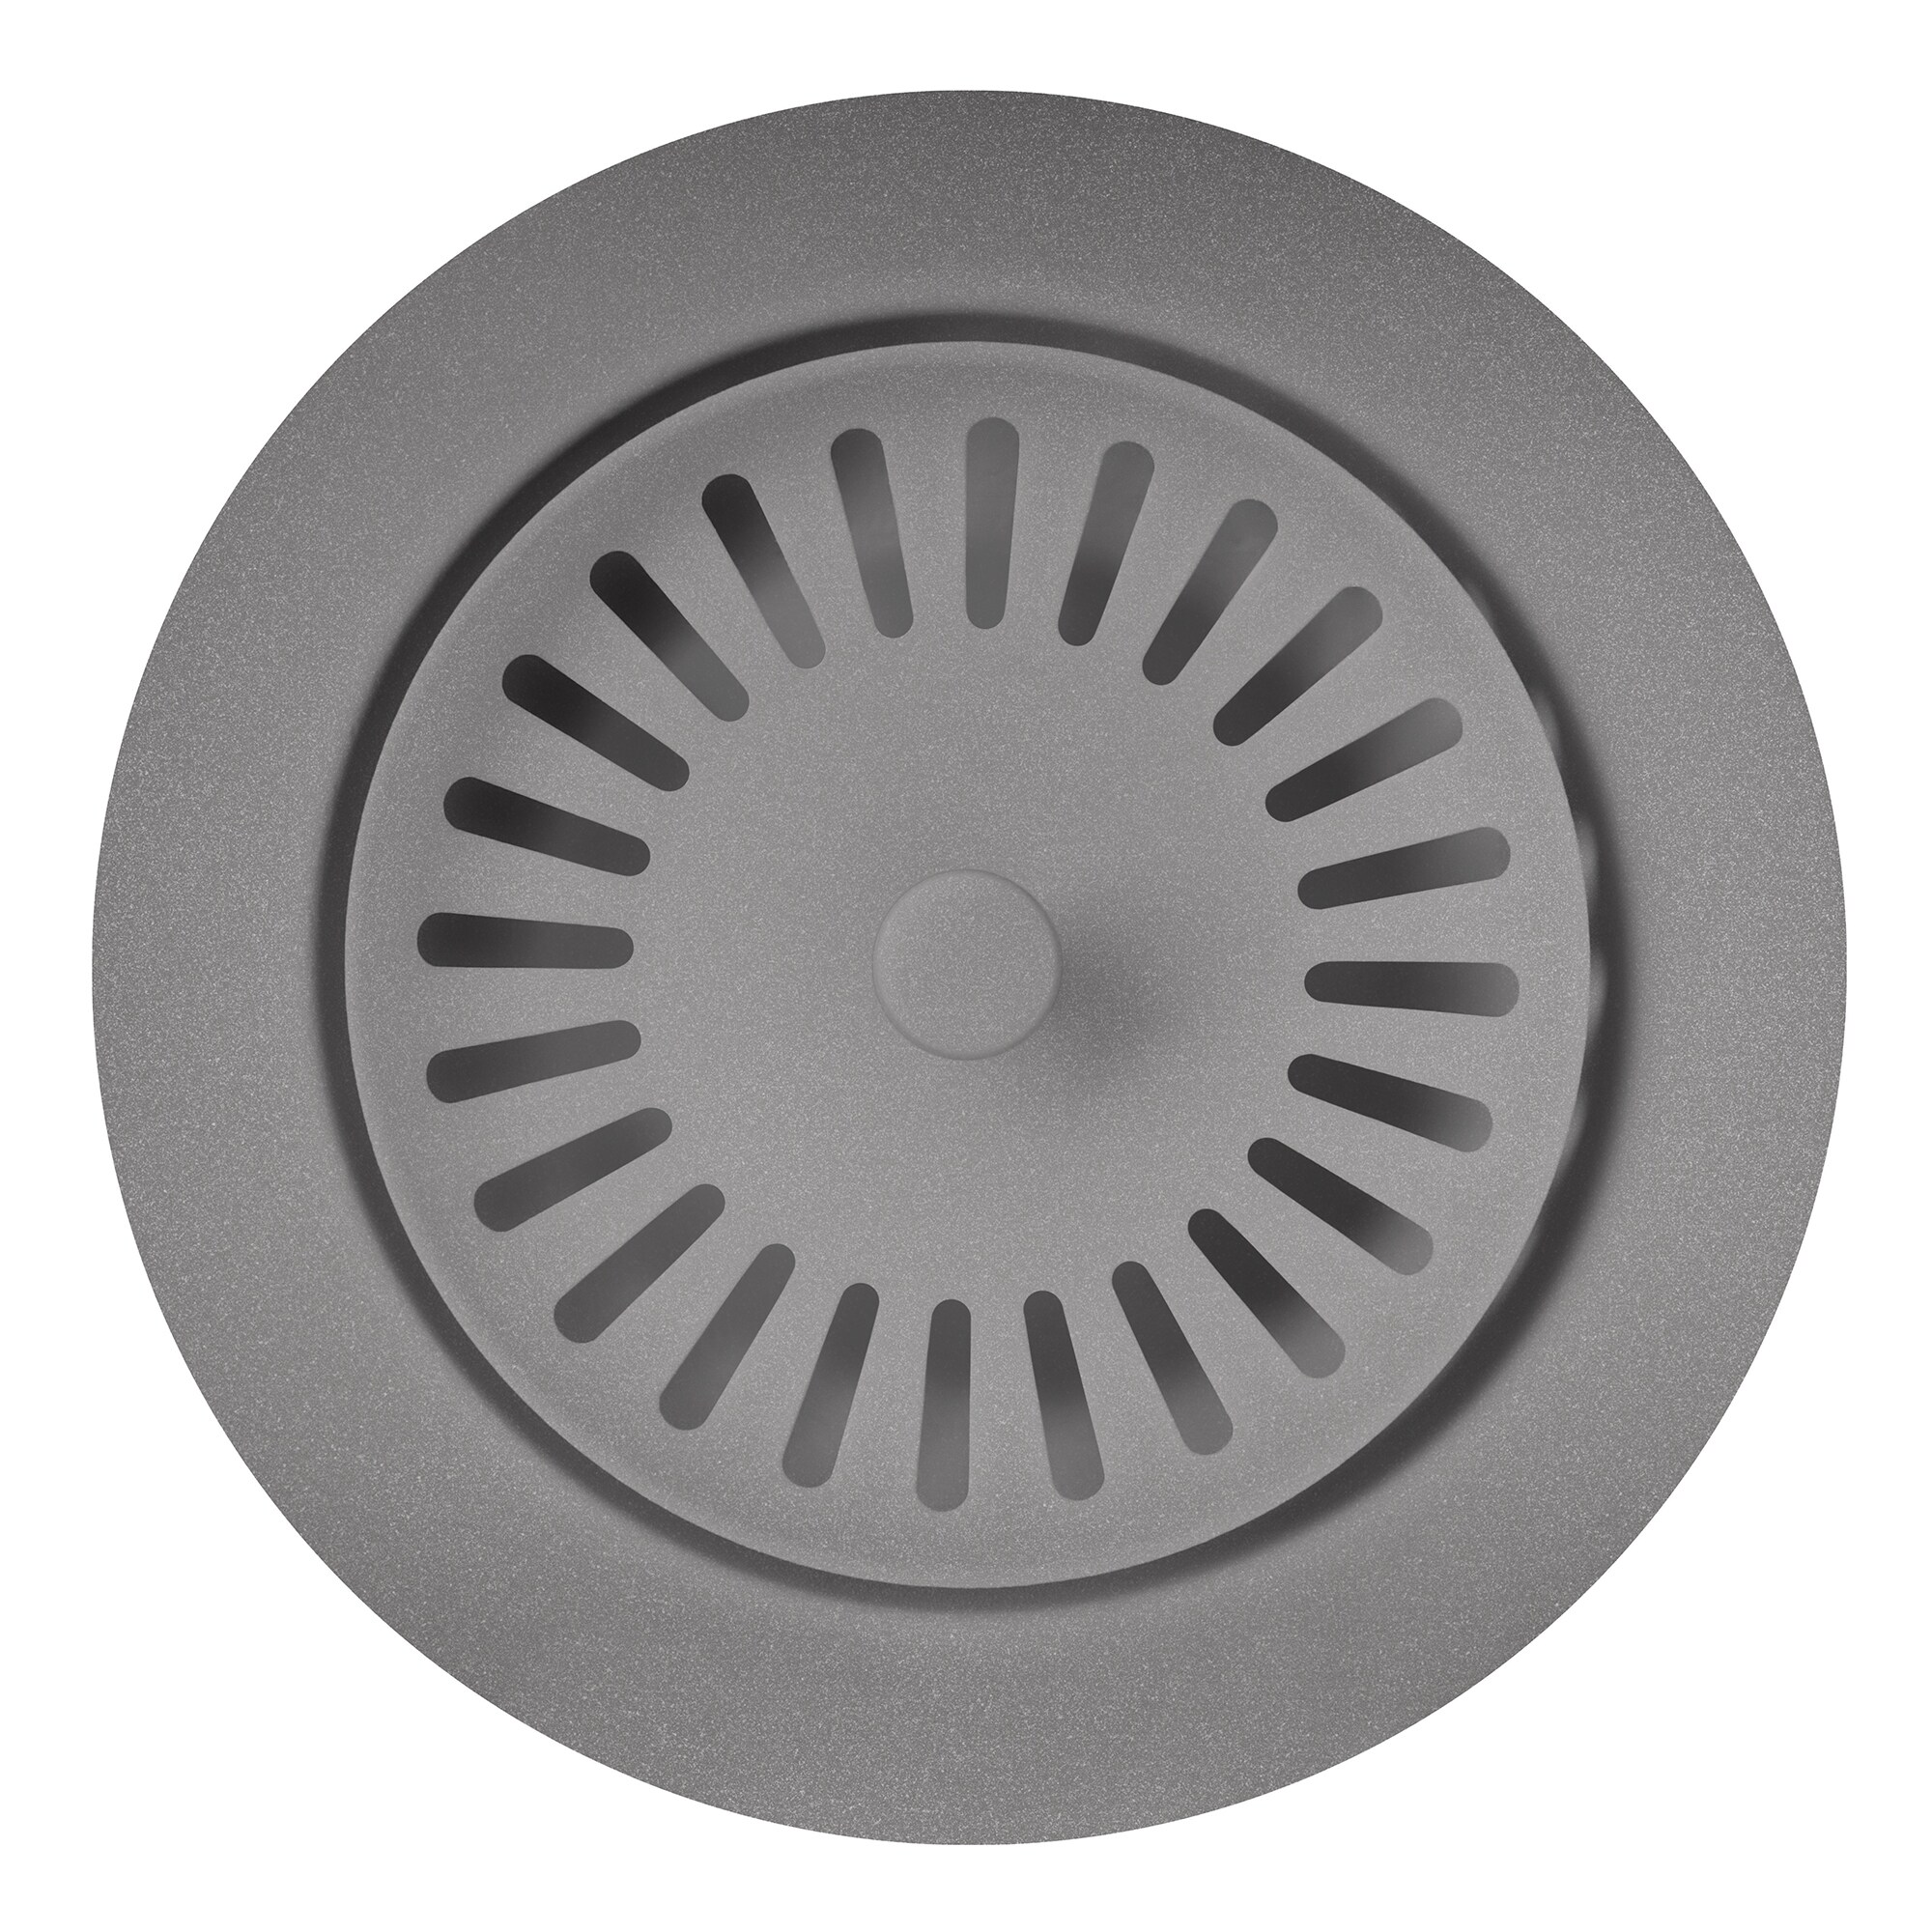 Blanco Sink topper Stainless steel Strainer waste cover